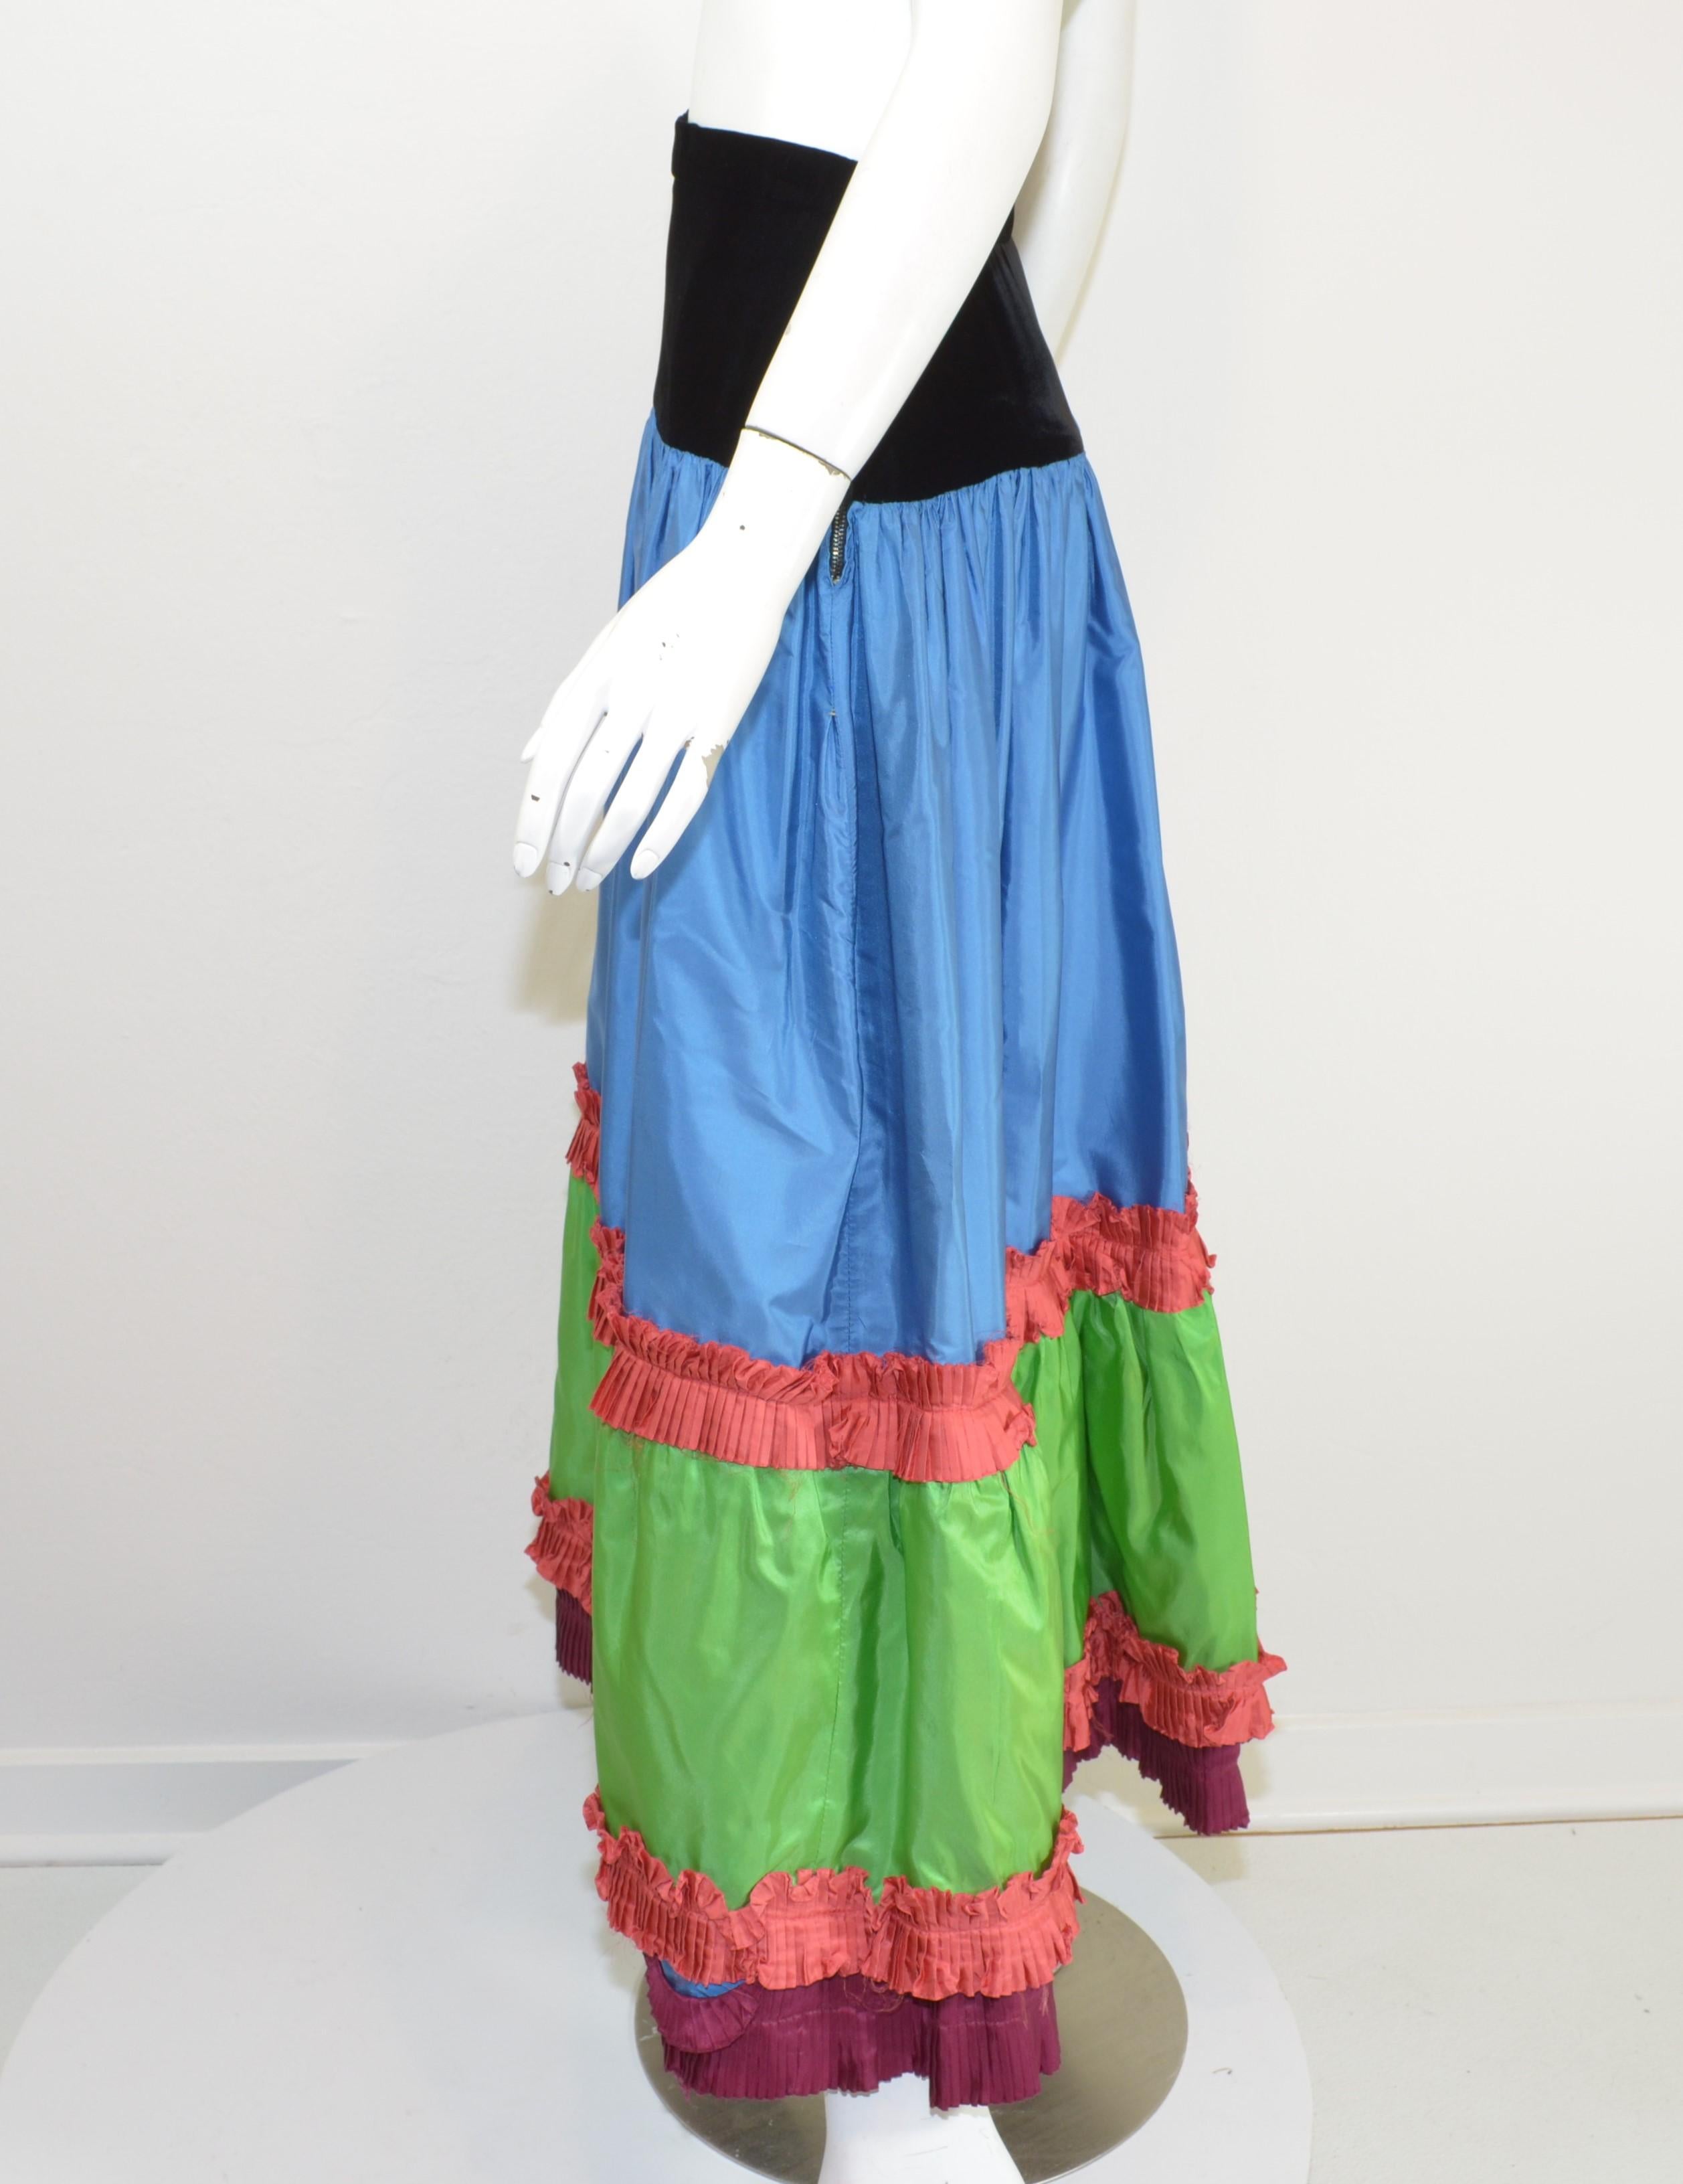 Saint Laurent Vintage Taffeta Skirt with Velvet — Featured in vibrant multicolored taffeta fabric with a velvet panel around the waist and has a zipper and hook fastening. Skirt is in excellent vintage condition with minimal wears. See photos. Made